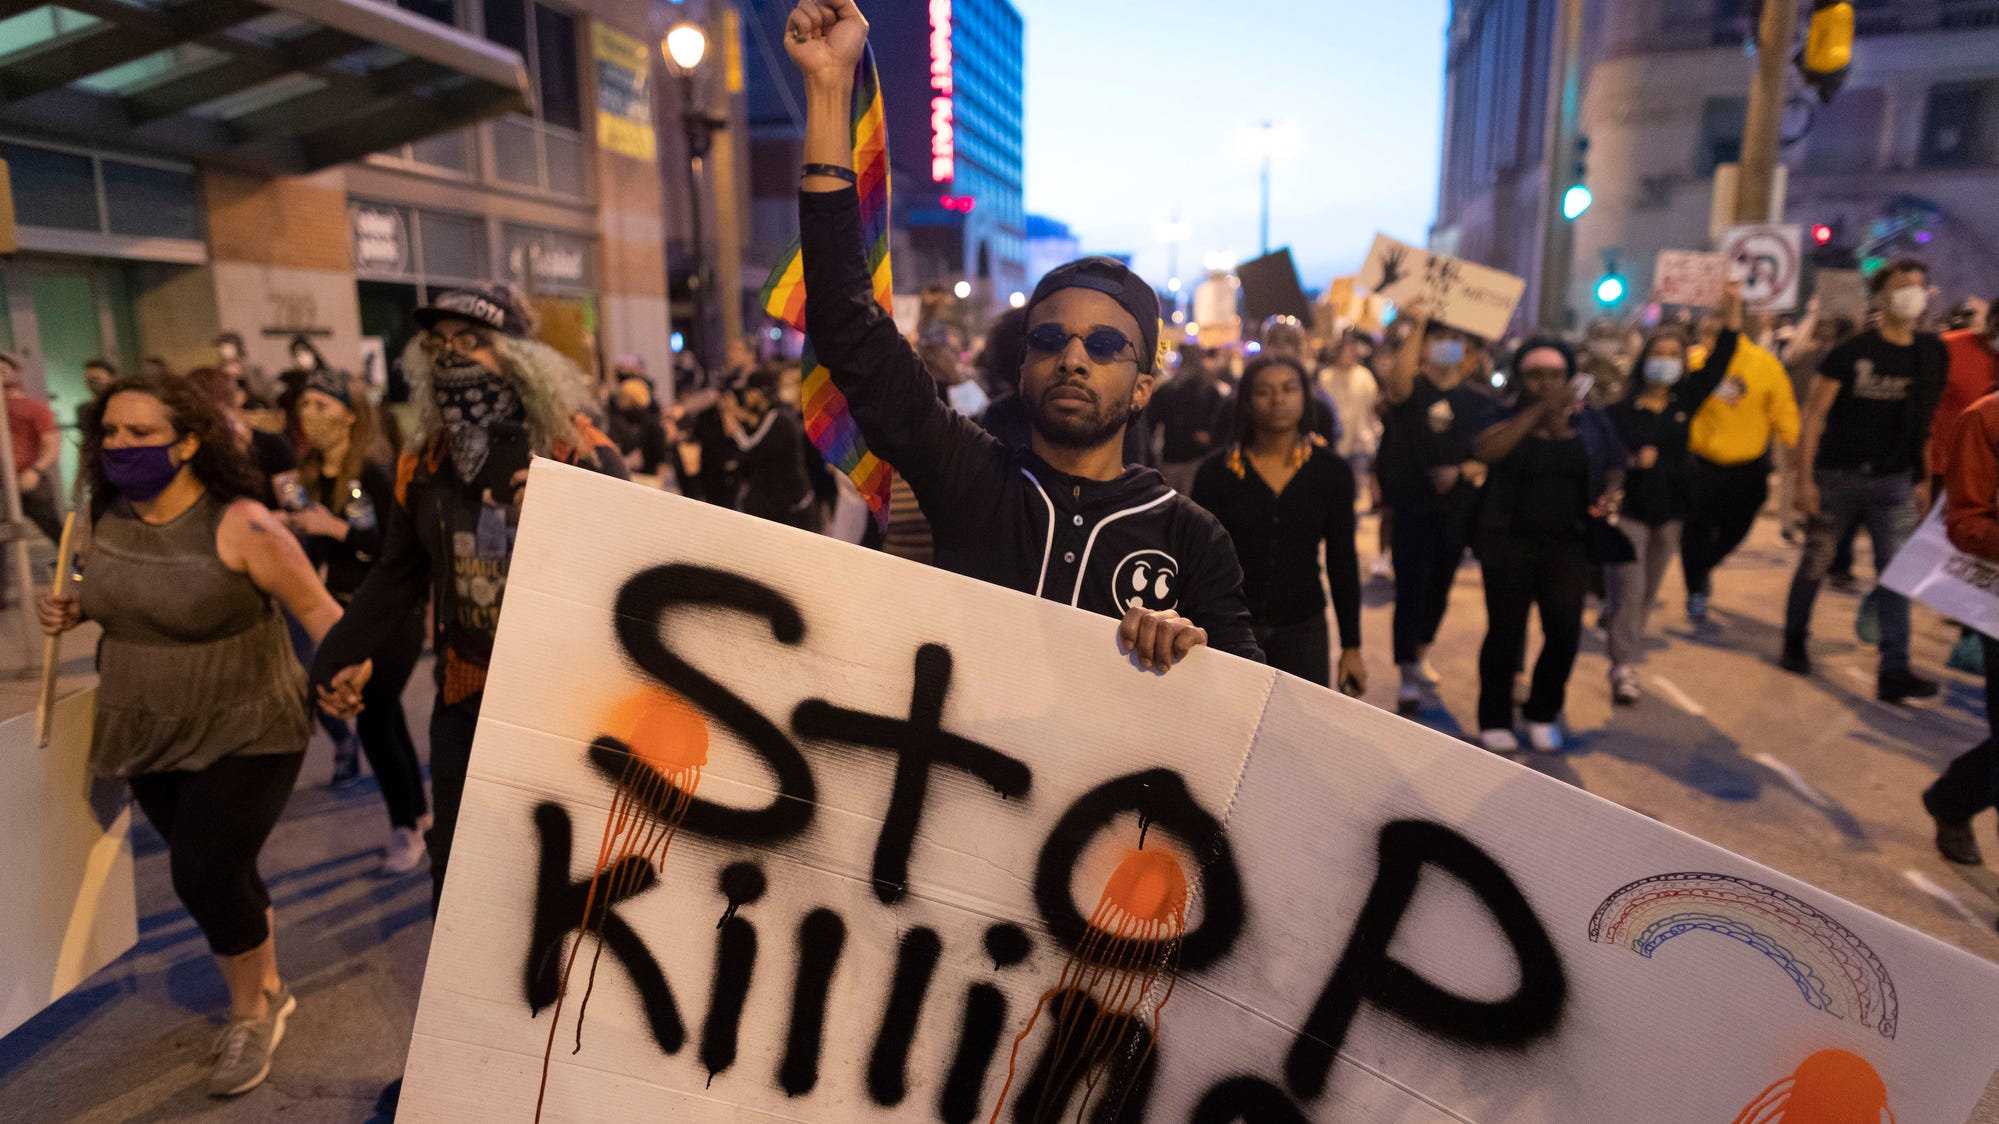 A group of about couple thousand people march and  protest peacefully Monday, June 1, 2020 in downtown Milwaukee, Wis. They were joined by cars blocking traffic. Police monitored the group, but it appears there were no arrests.

MARK HOFFMAN/MILWAUKEE JOURNAL SENTINEL